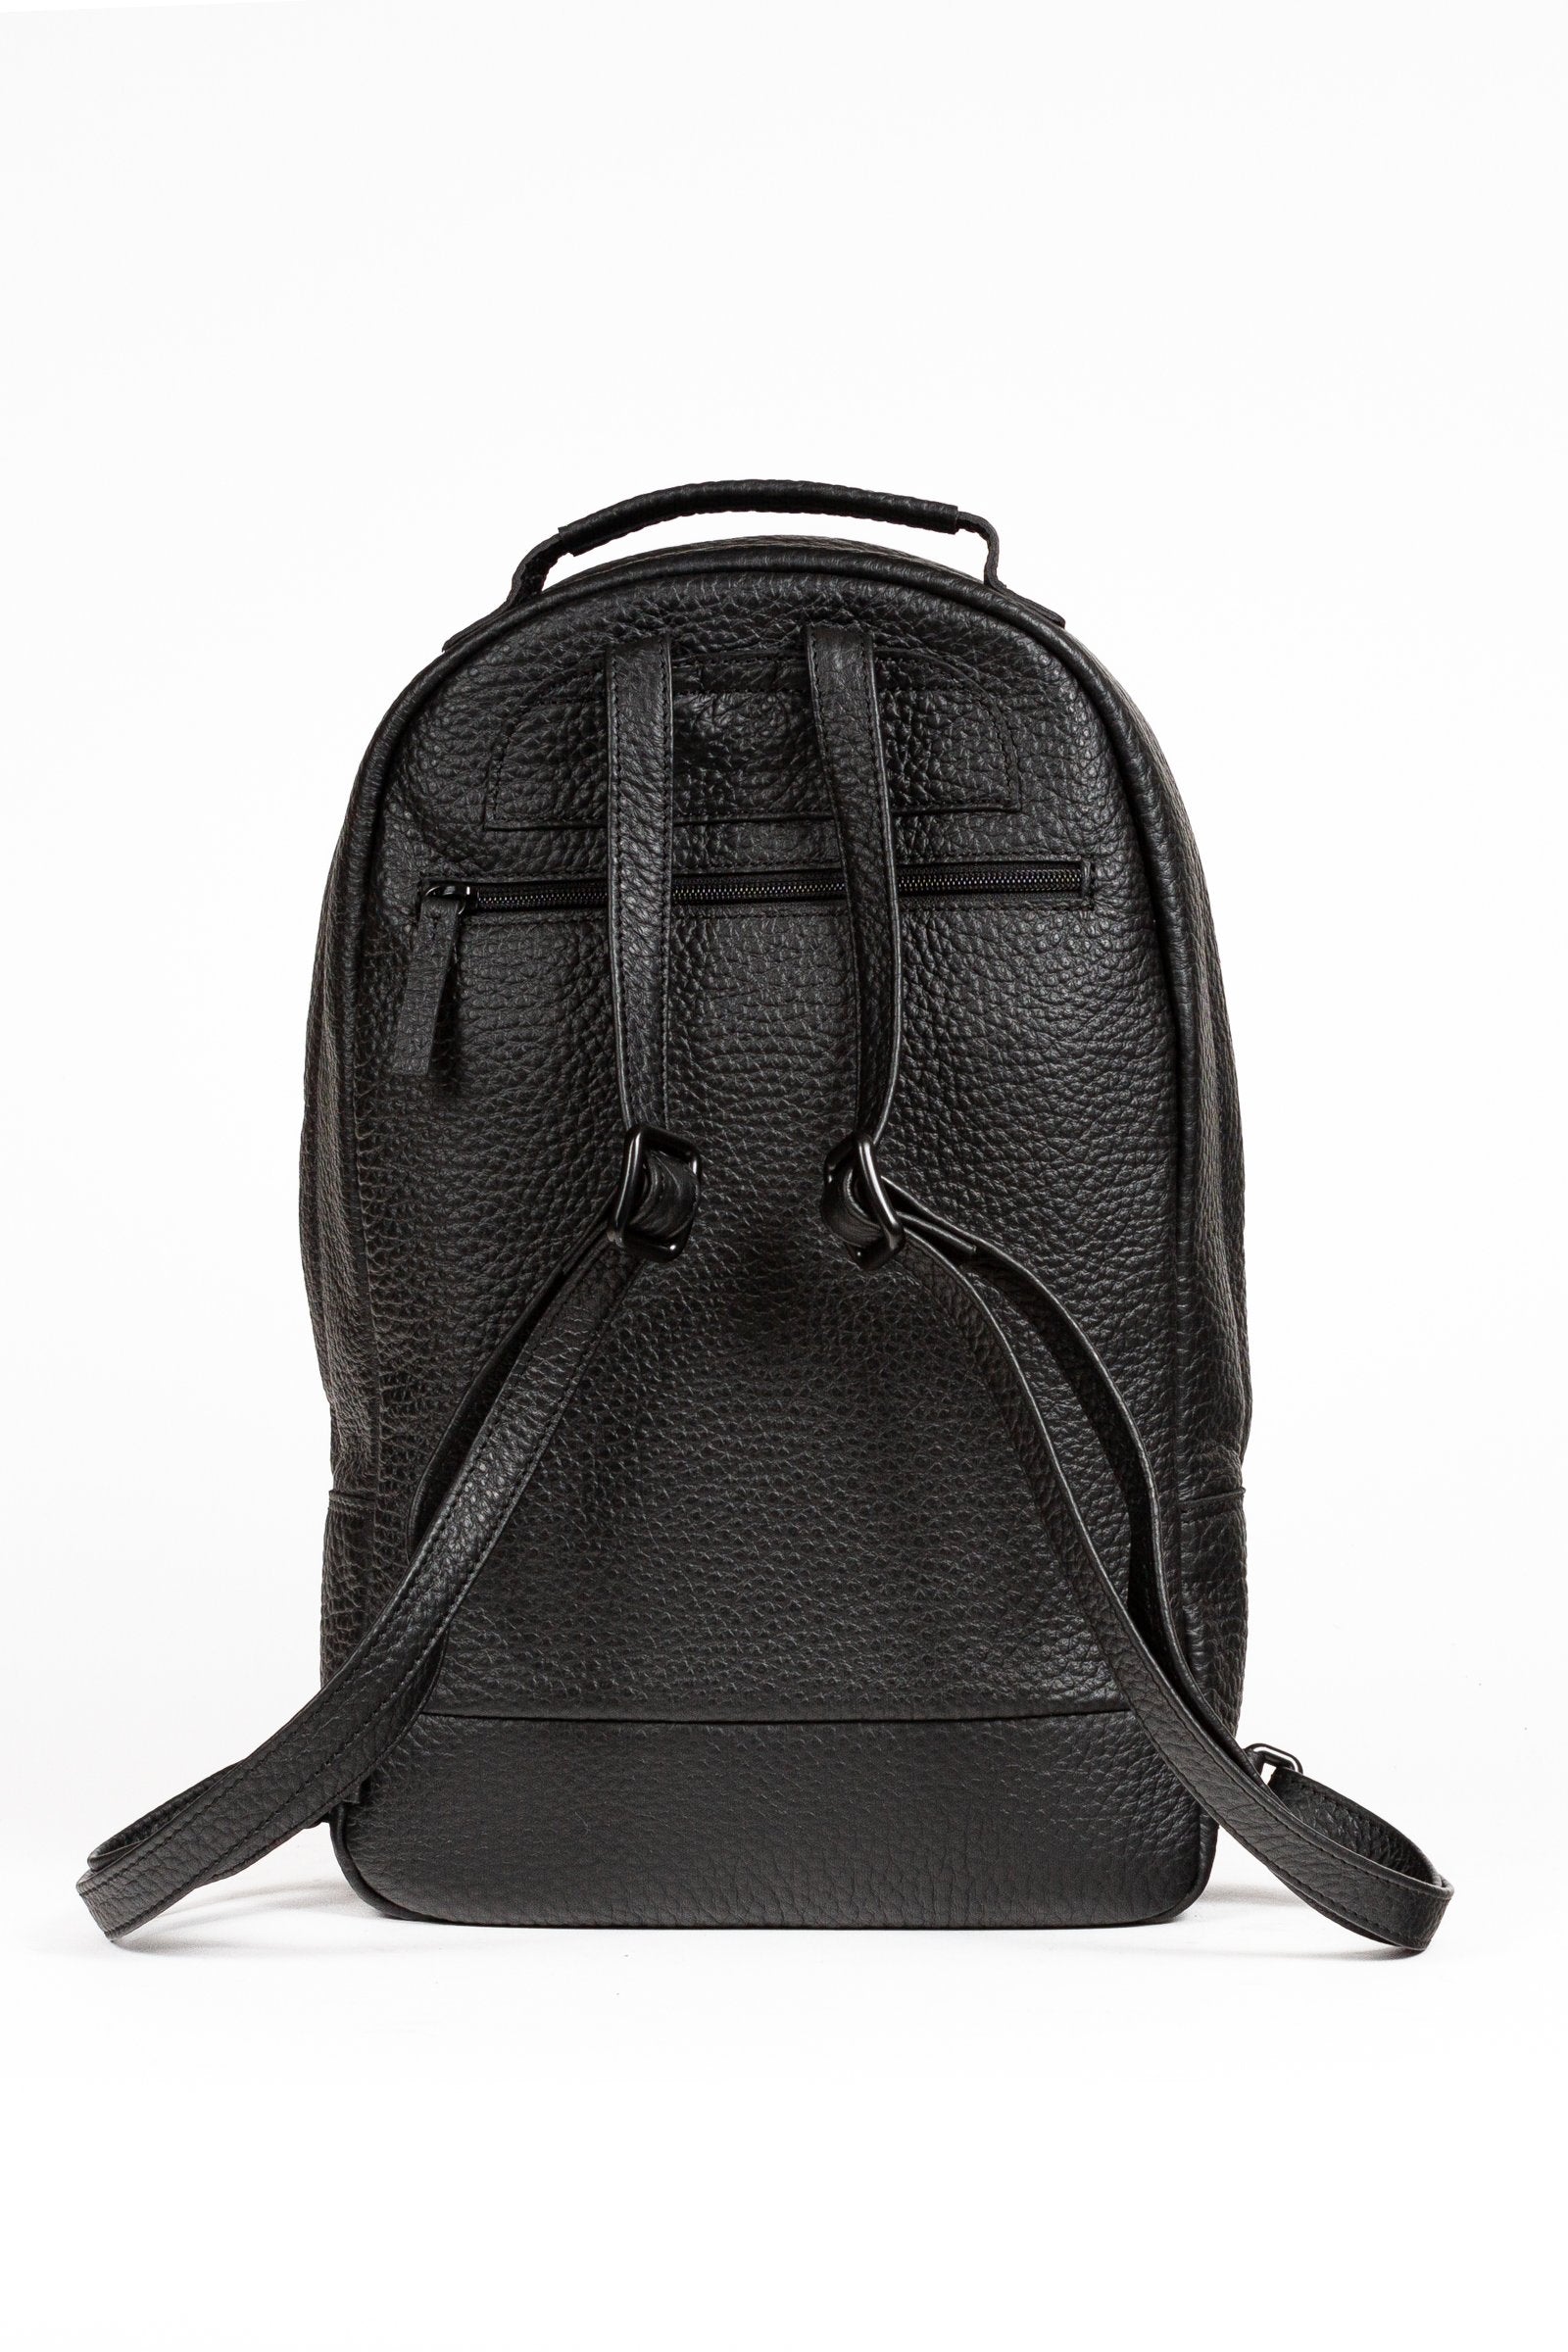 BEON.COM.AU The Jost Kopenhagen Small Backpack is a leather bag made in Europe from premium European leathers and fabrics. Coarsely milled cowhide Backpack padded compartment 19cm x 23cm x 1.5cm Zipper pocket, plug-in and card compartment and key holder 1 main compartment, fits A4 documents, closes with two-... Jost at BEON.COM.AU